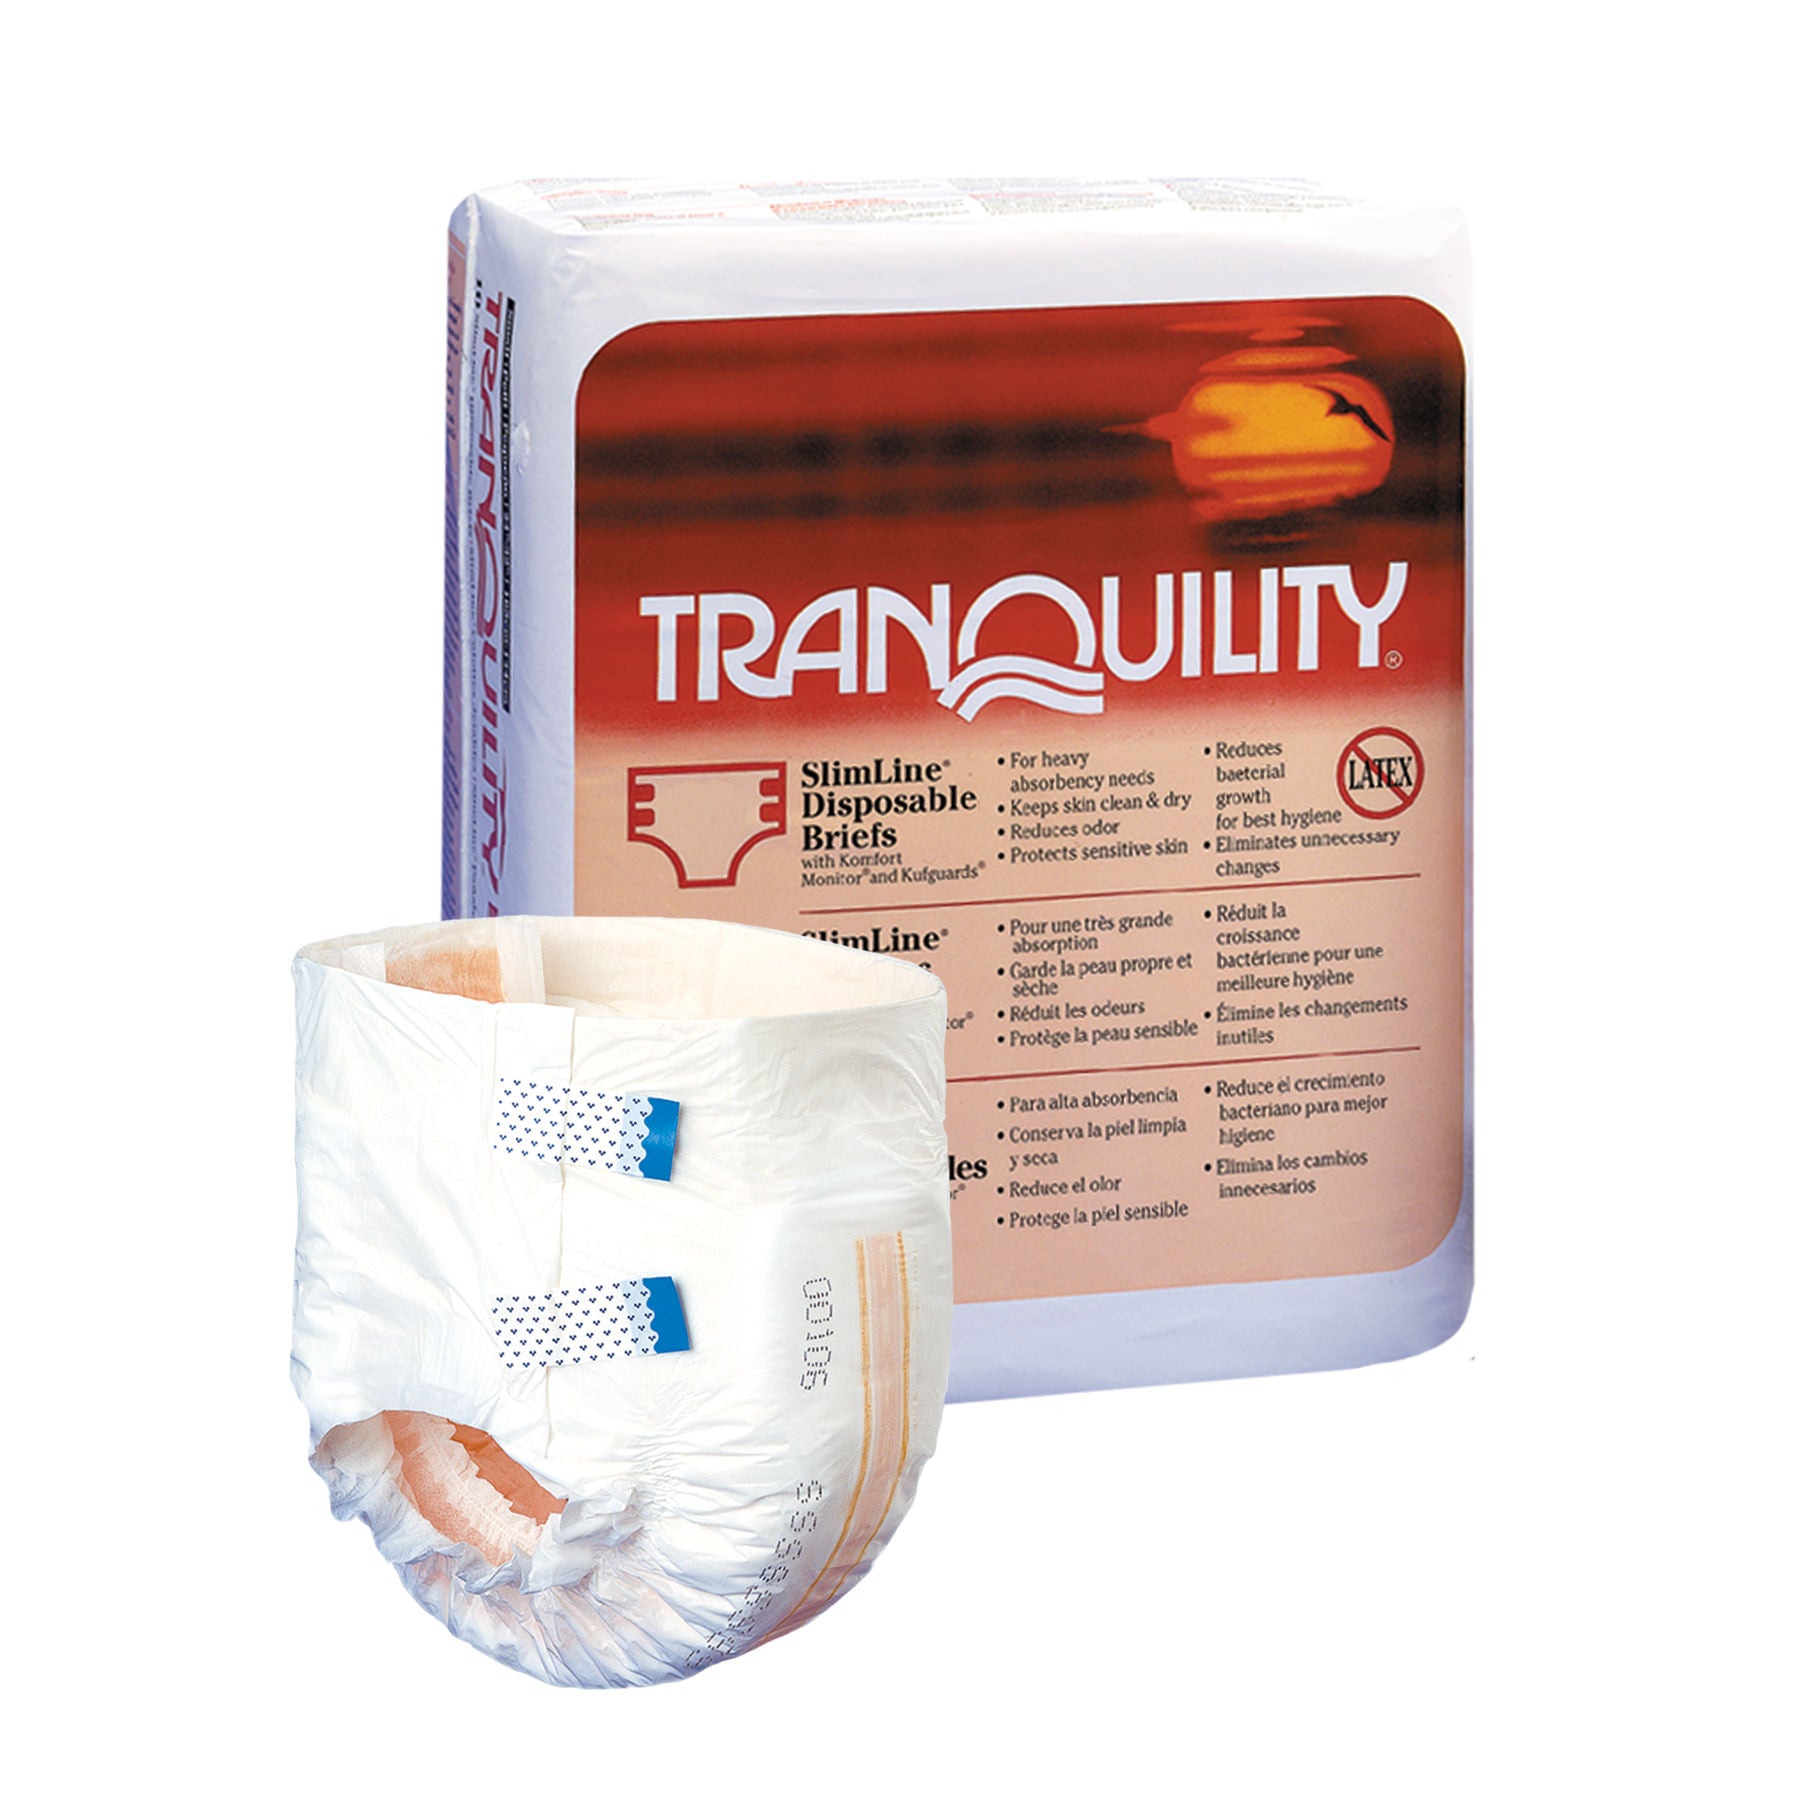 Tranquility All Through the Night - Adult Diapers with Tabs